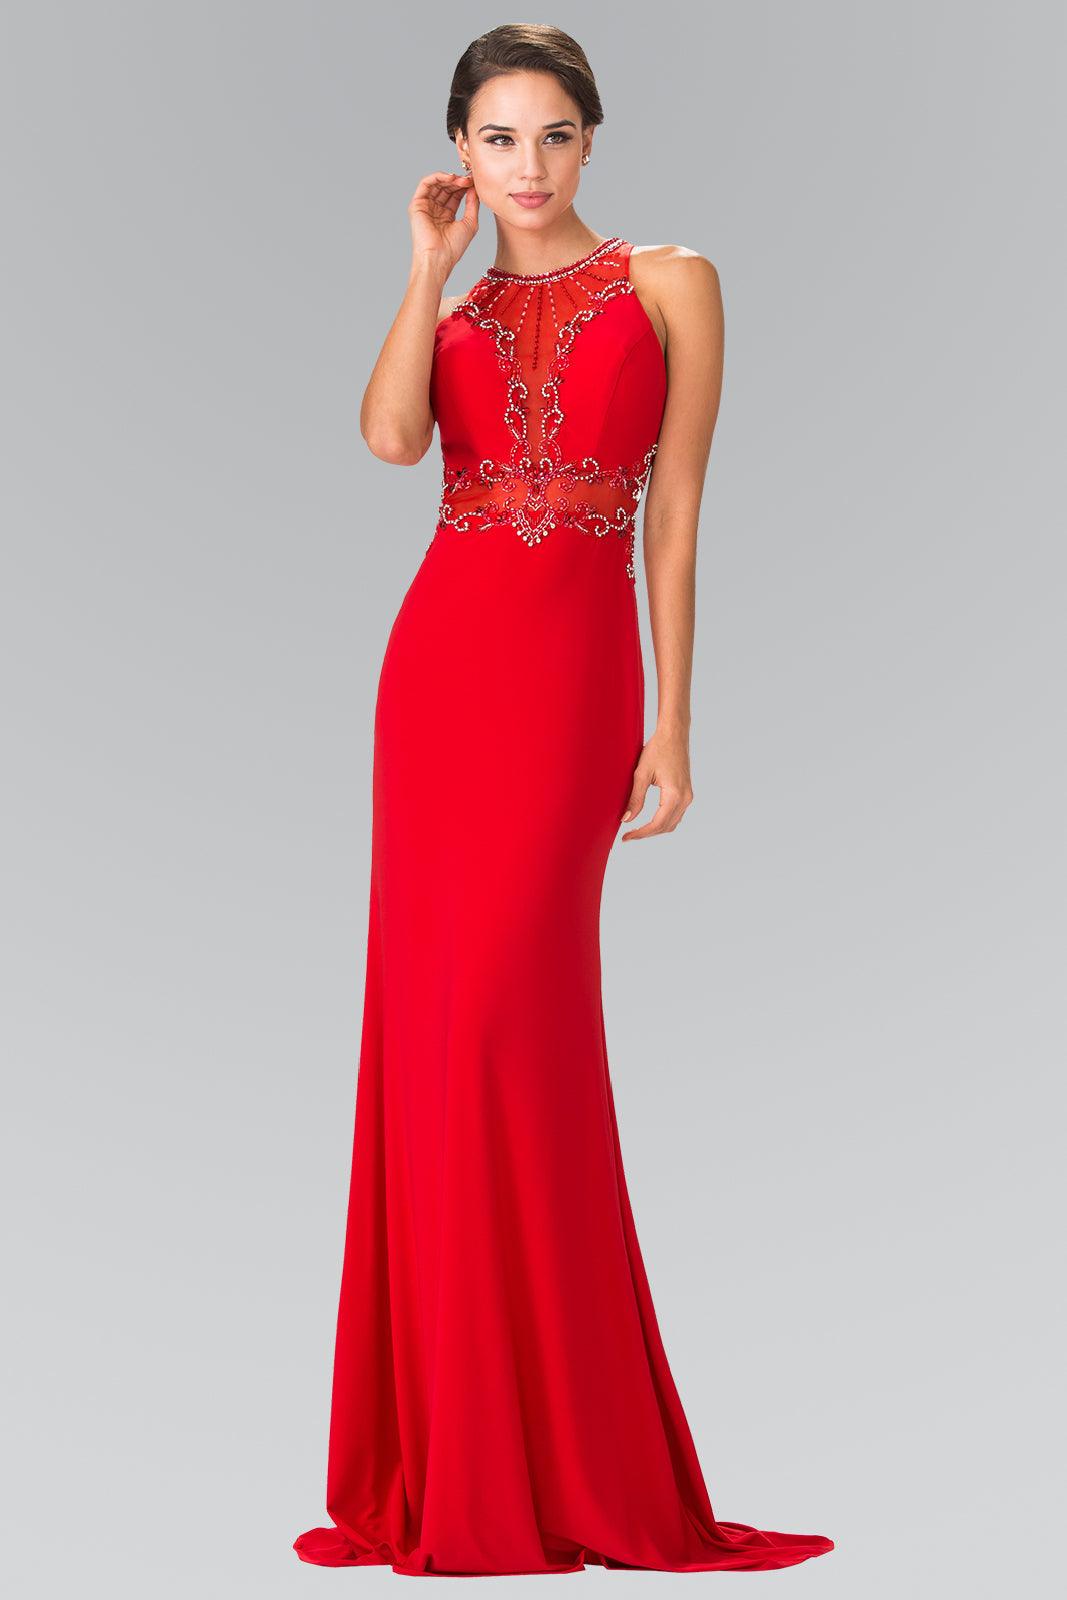 Long Formal Fitted Prom Dress Evening Gown - The Dress Outlet Elizabeth K